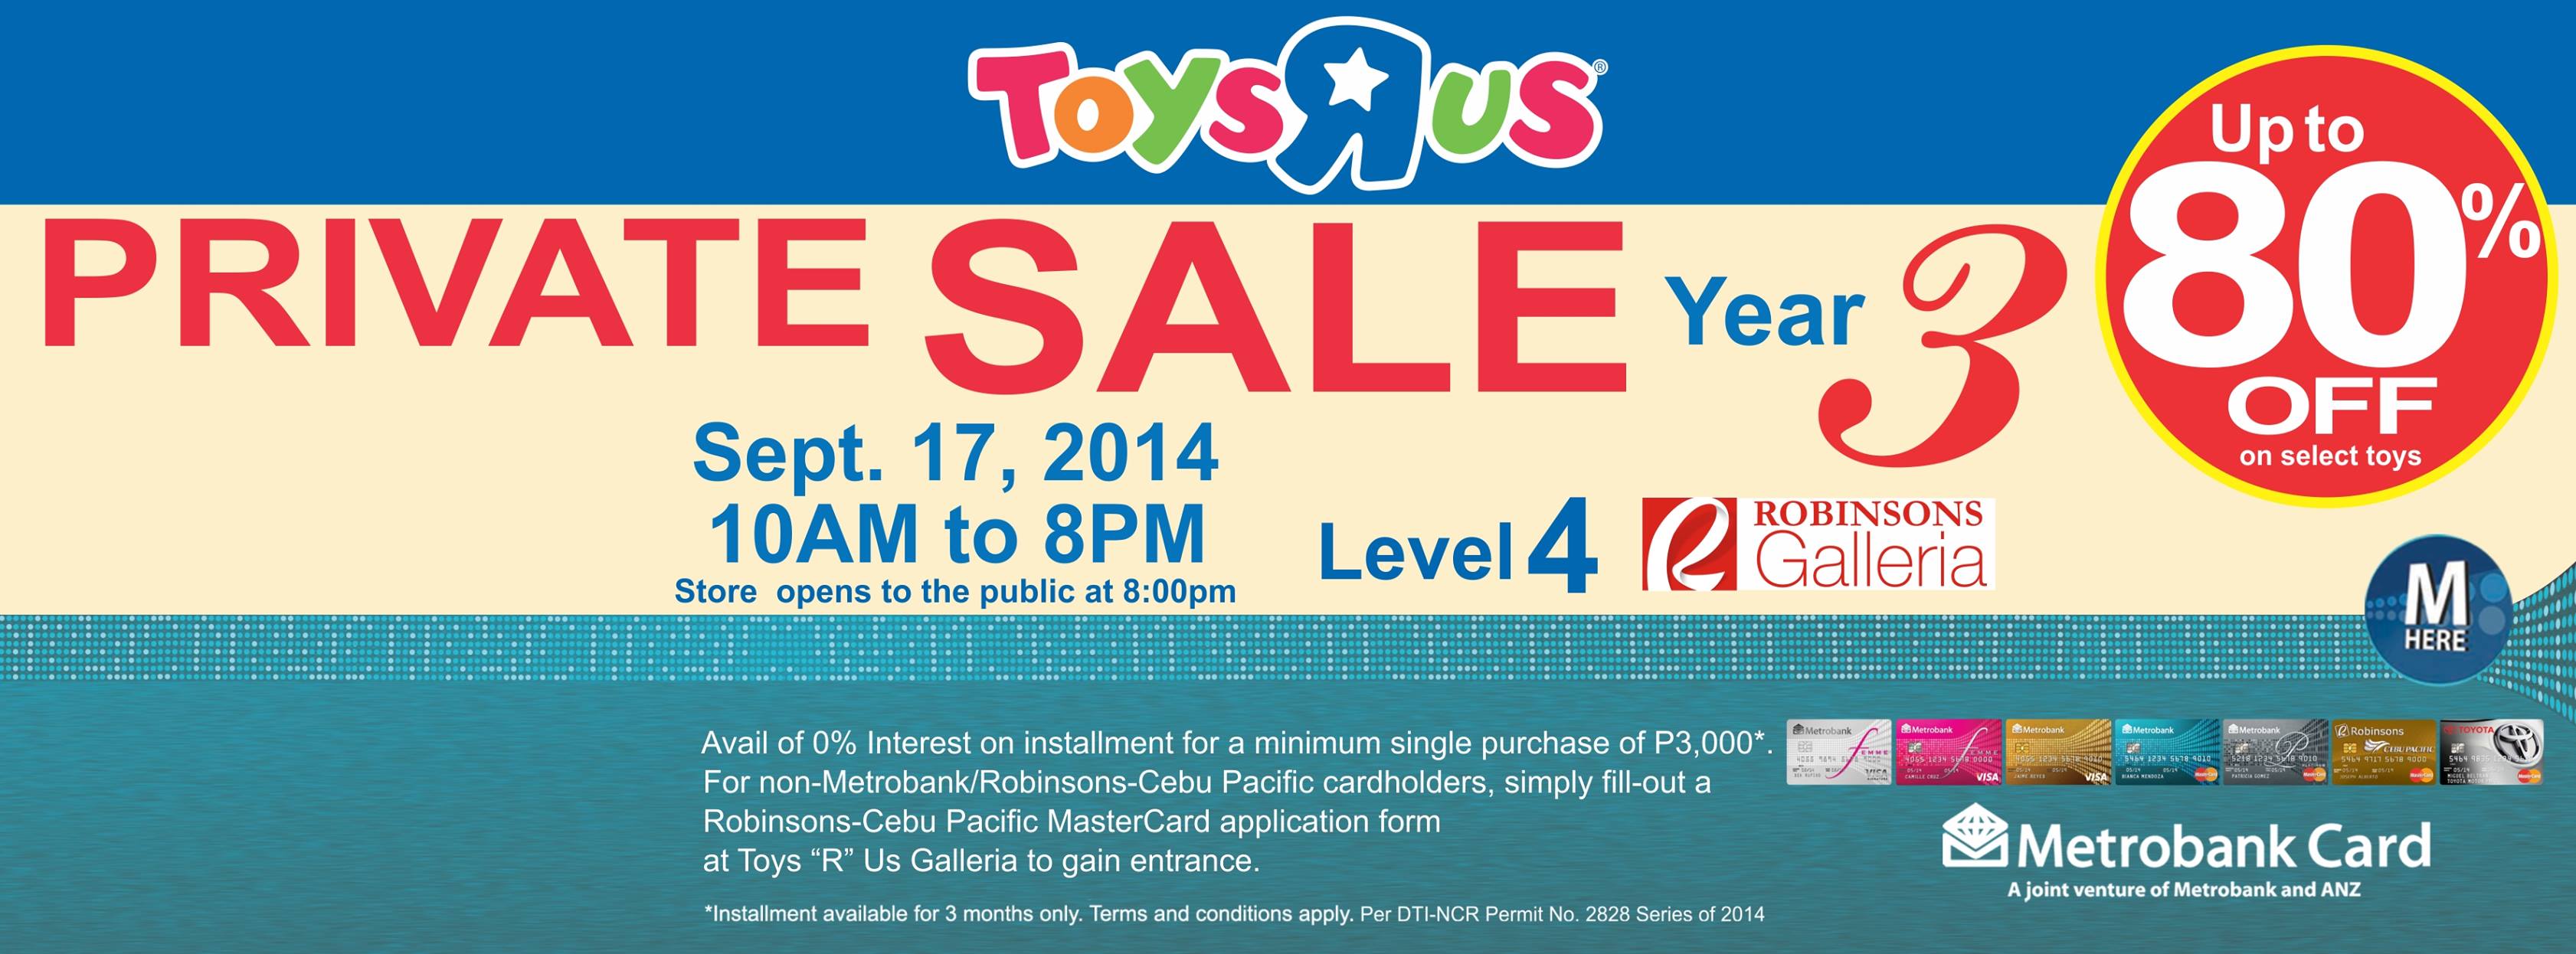 Toys R Us Private Sale @ Robinsons Galleria September 2014